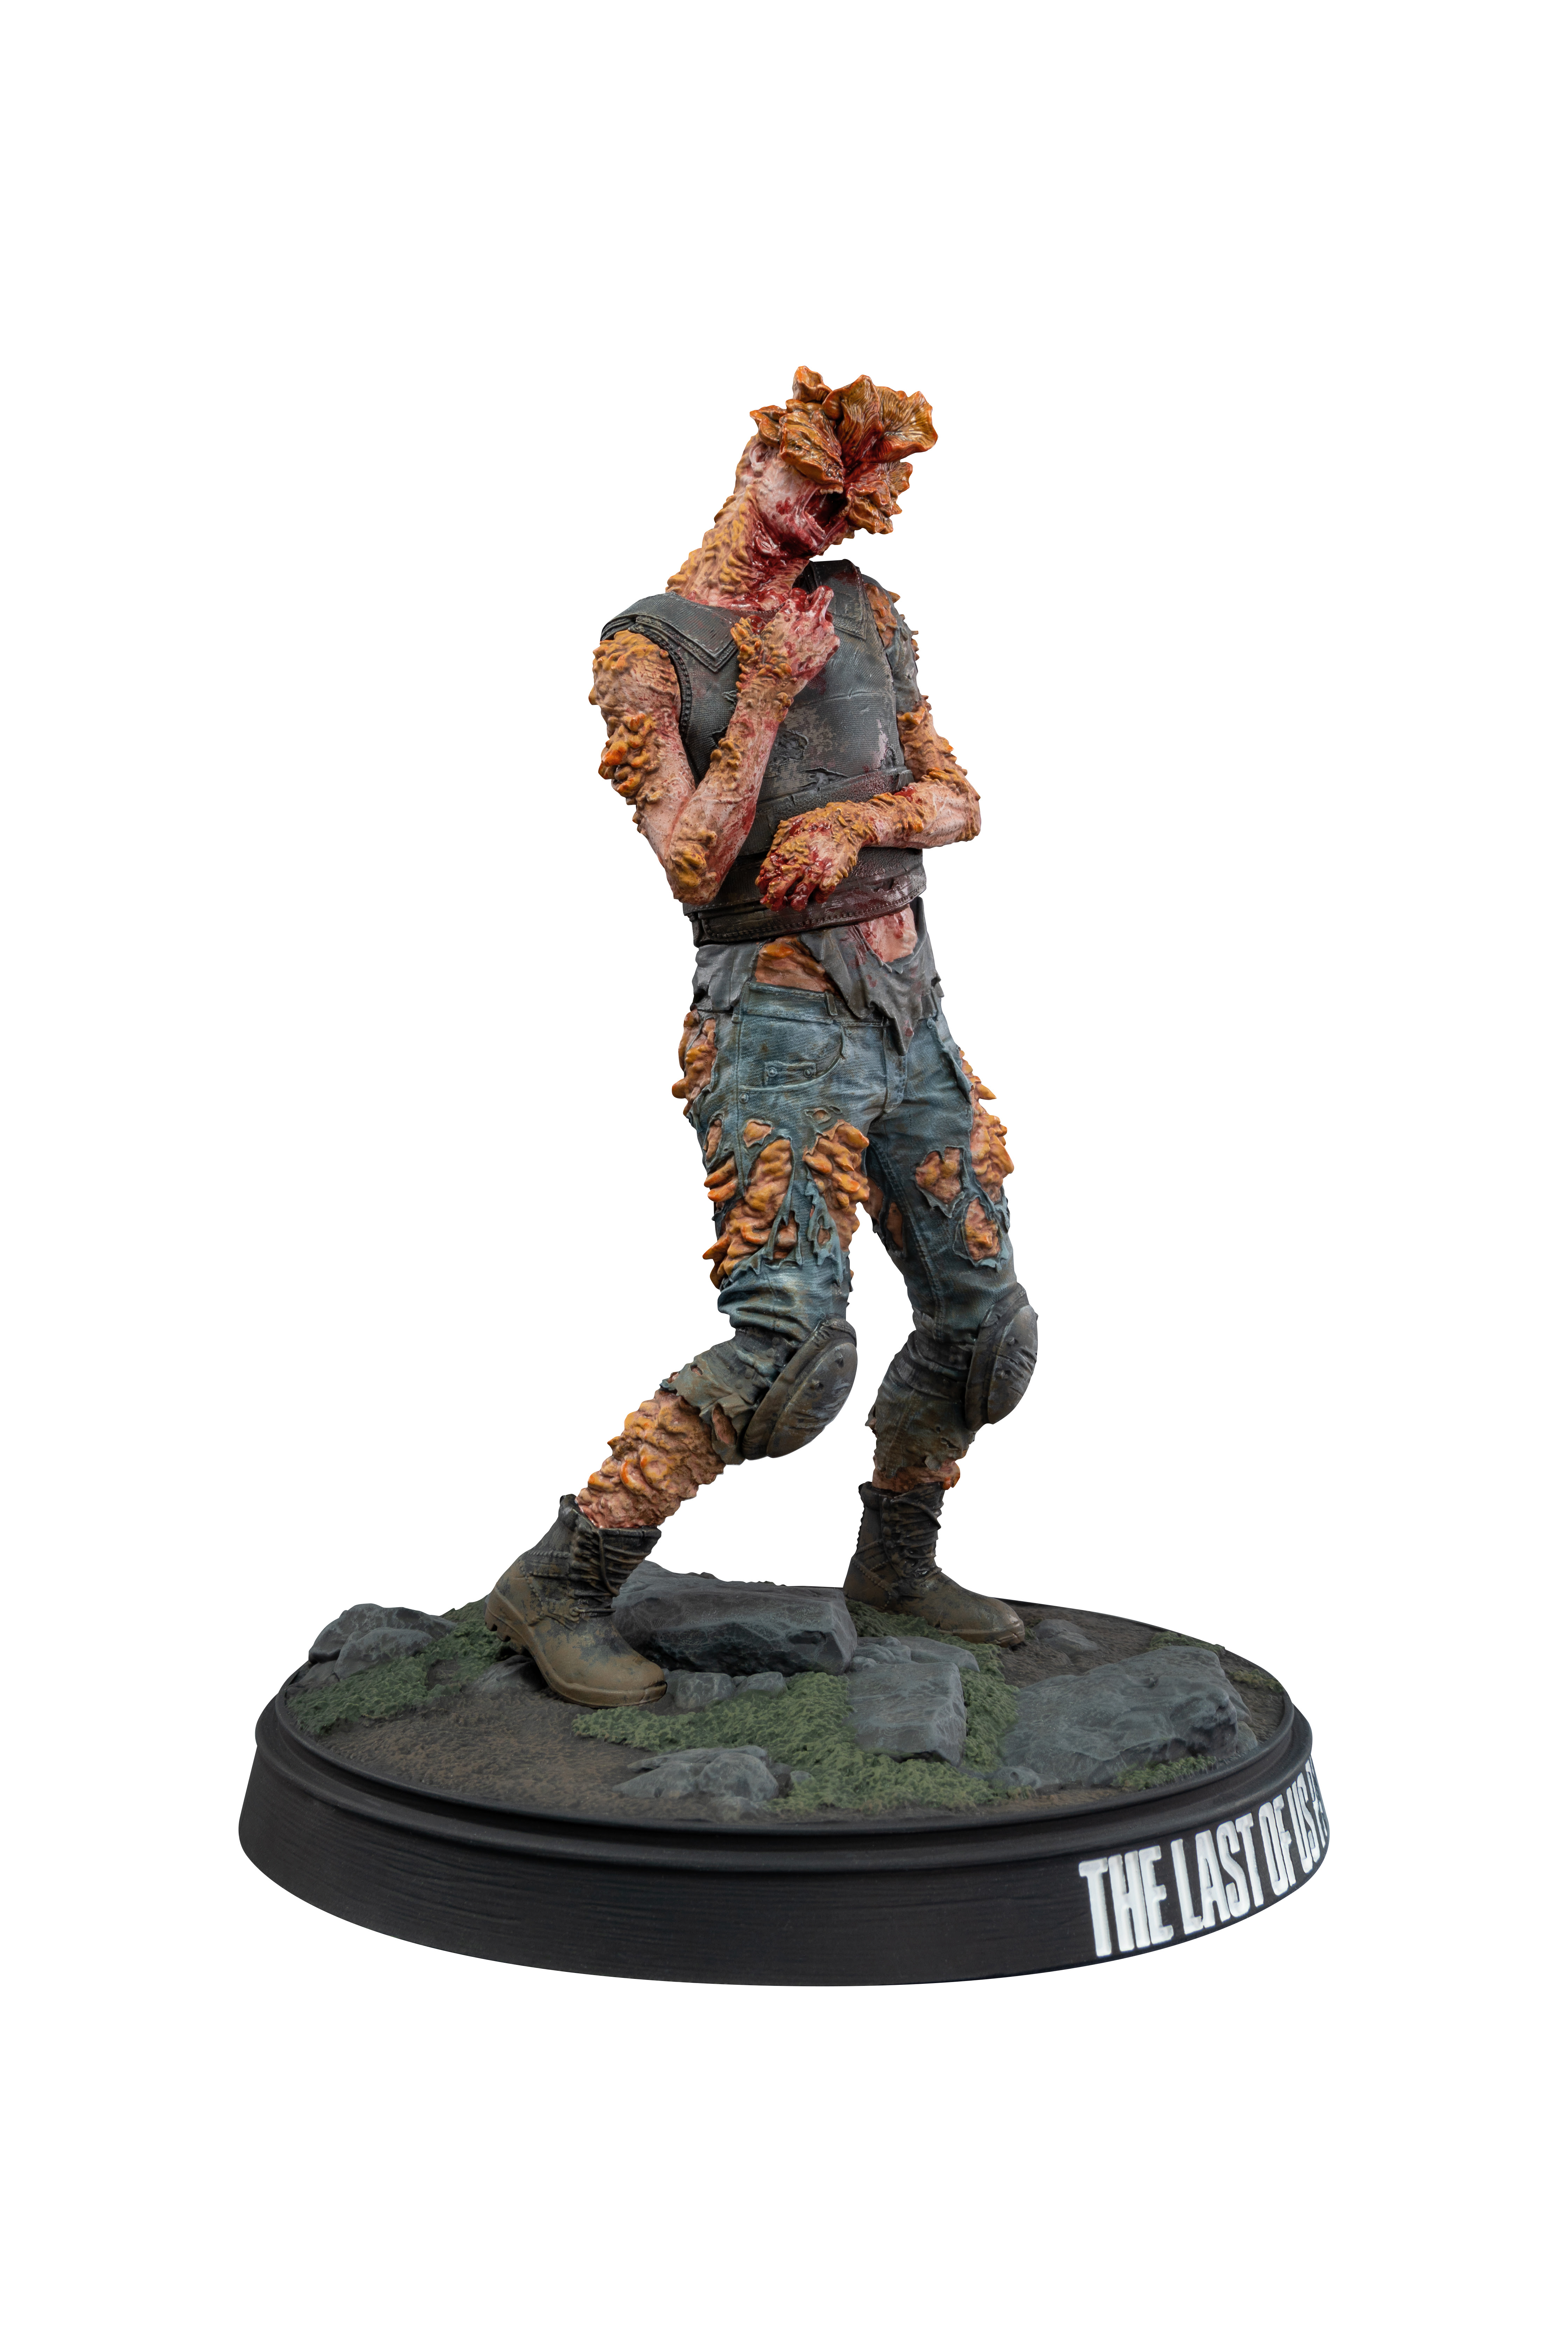 The Last of Us Part ll: Armored Clicker Figure